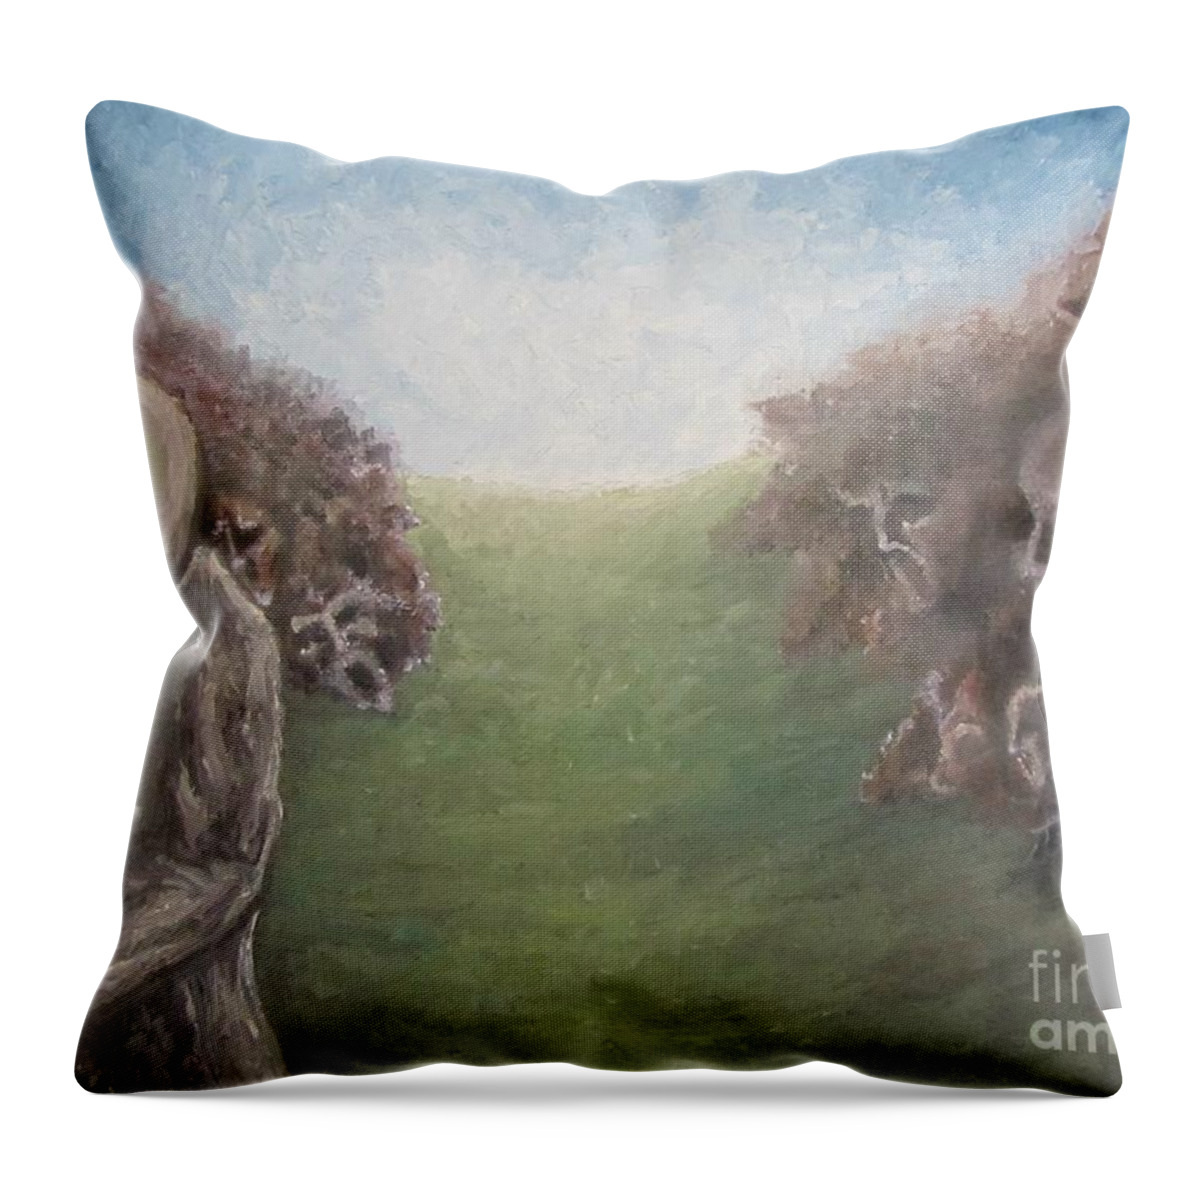 Tmad Throw Pillow featuring the painting Closure by Michael TMAD Finney